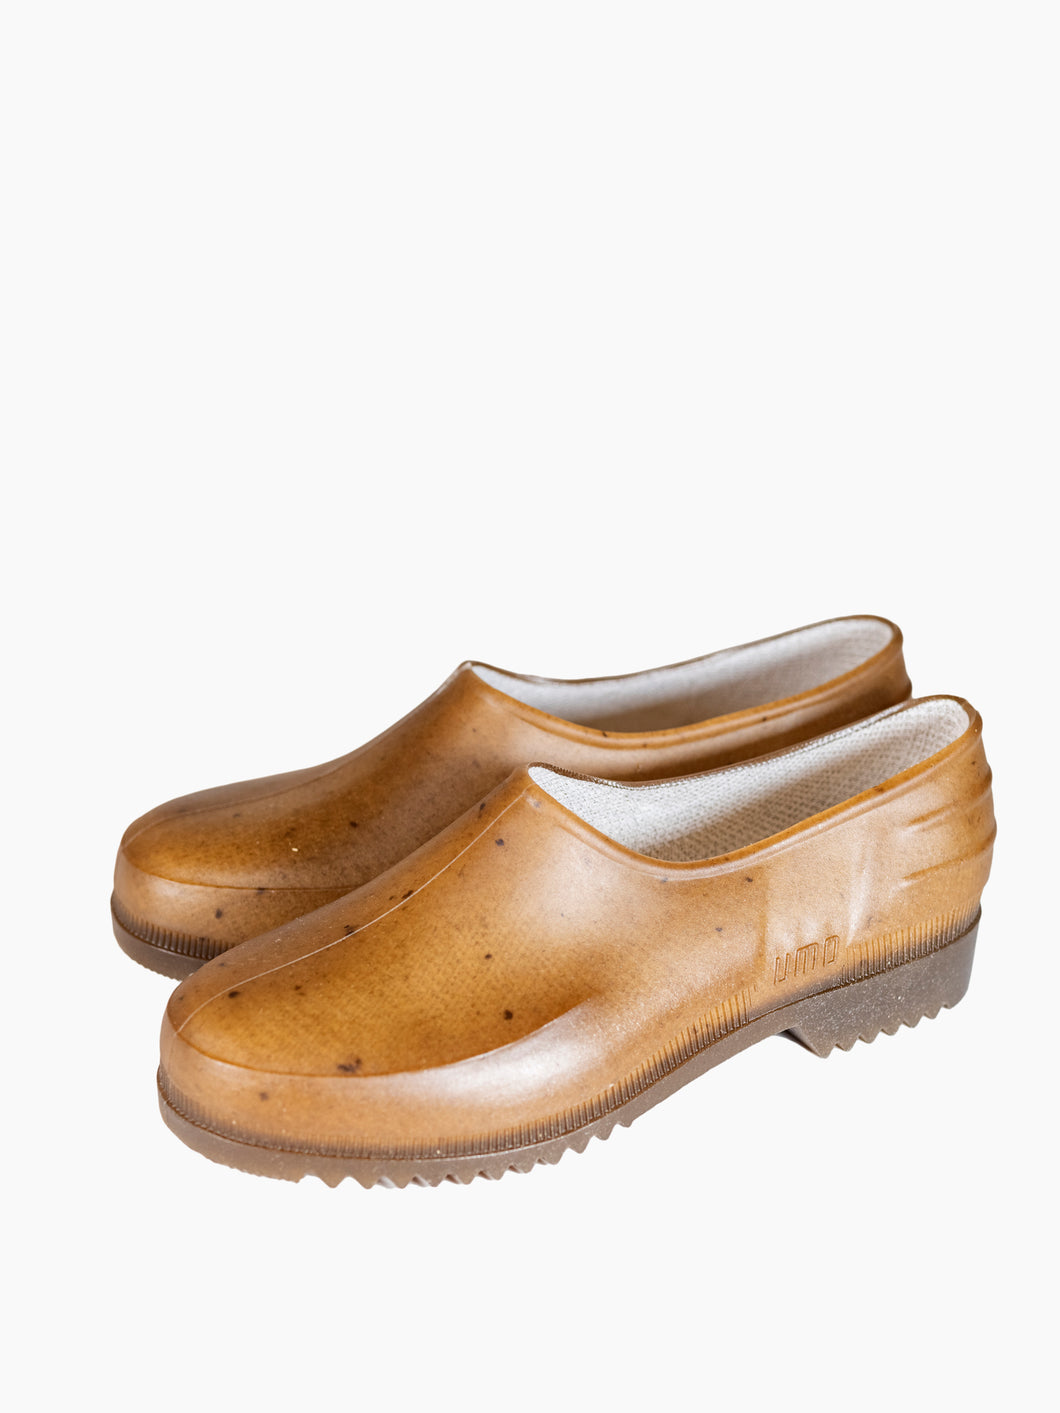 French Recycled Hemp Gardening Clogs in Sepia